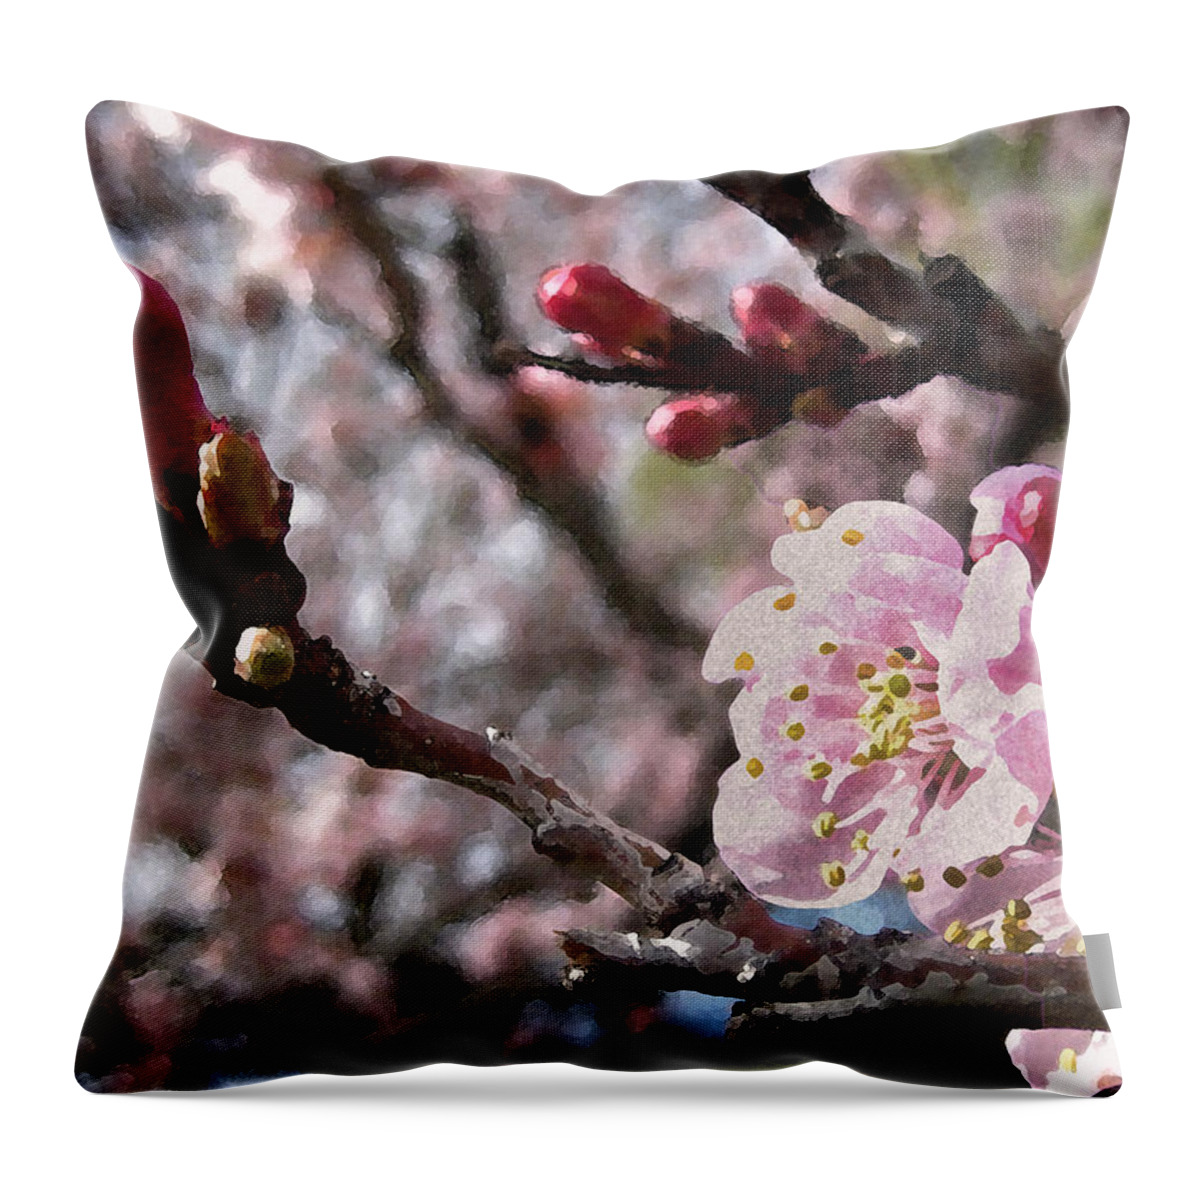 Tree Throw Pillow featuring the photograph Apricot Floral by Kathy Bassett